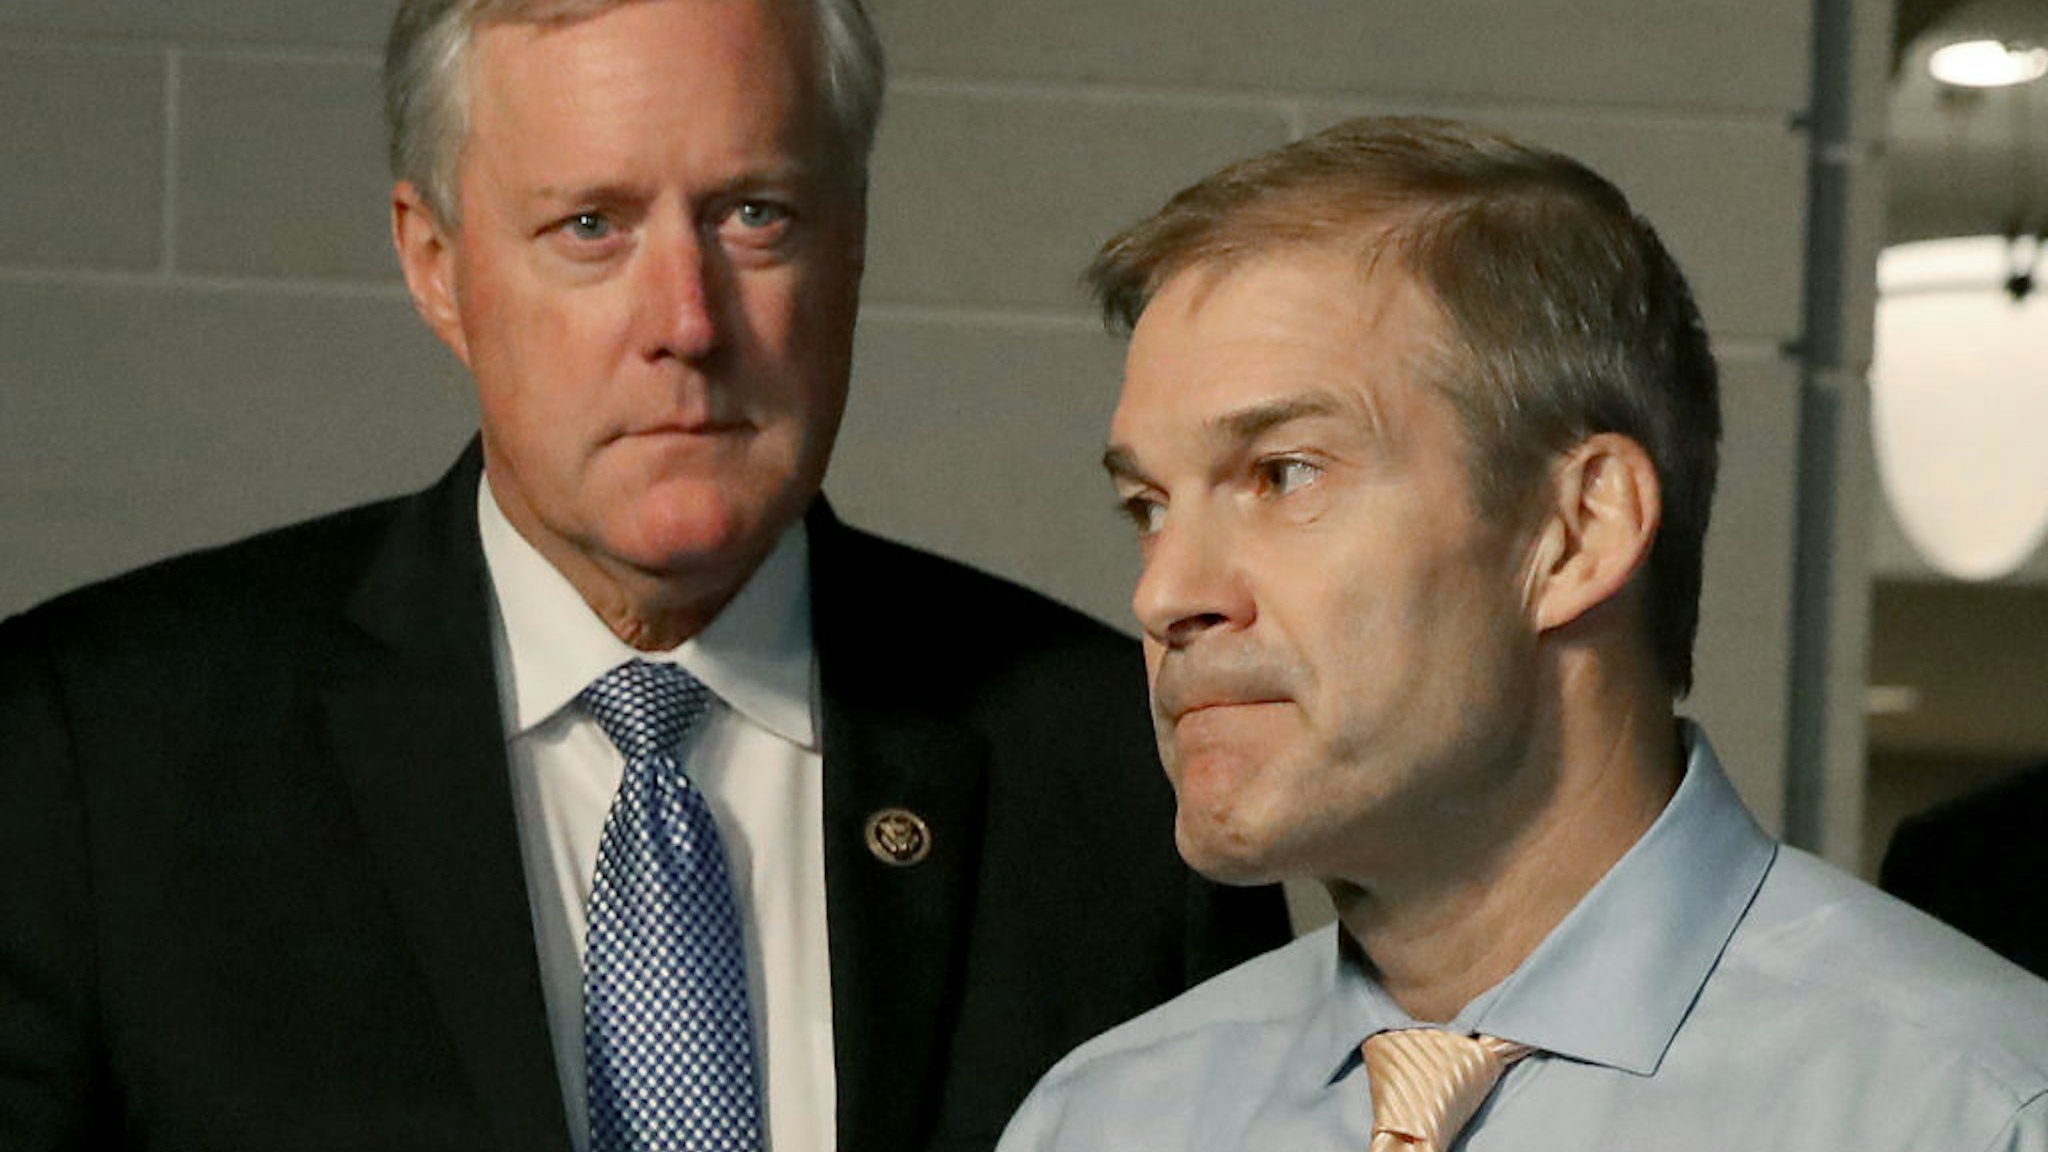 Rep. Jim Jordan (R-OH) (R) and Rep. Mark Meadows (R-NC) speak to the media during a break in a closed door House Intelligence Committee meeting where former US Special Envoy for Ukraine Kurt Volker is being interviewed at the U.S. Capitol October 03, 2019 in Washington, DC.